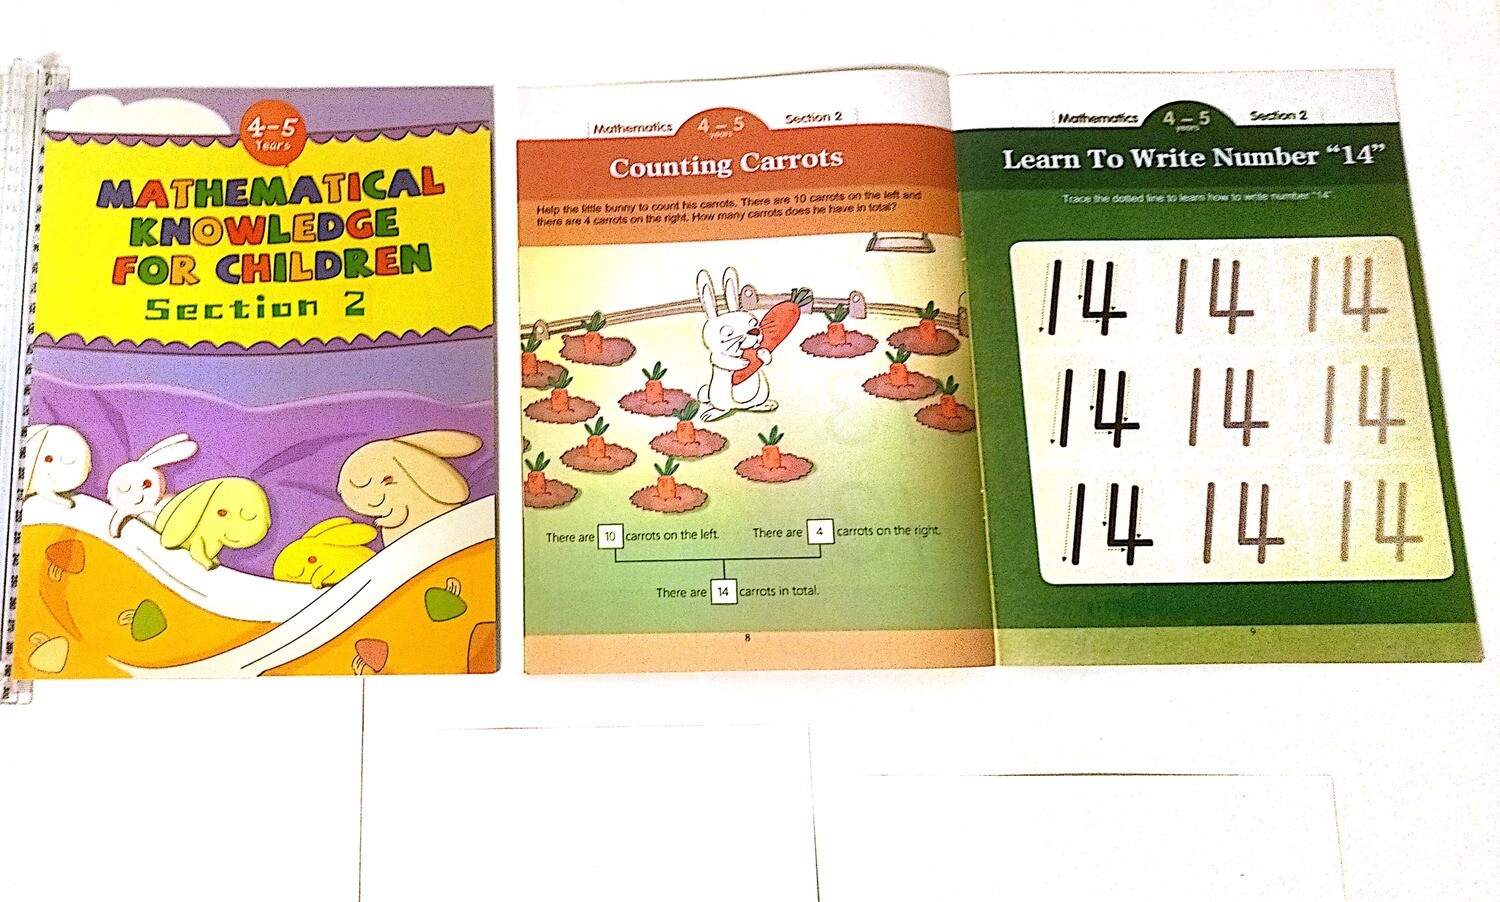 Maths Knowledge Section (2) 4-5 Years